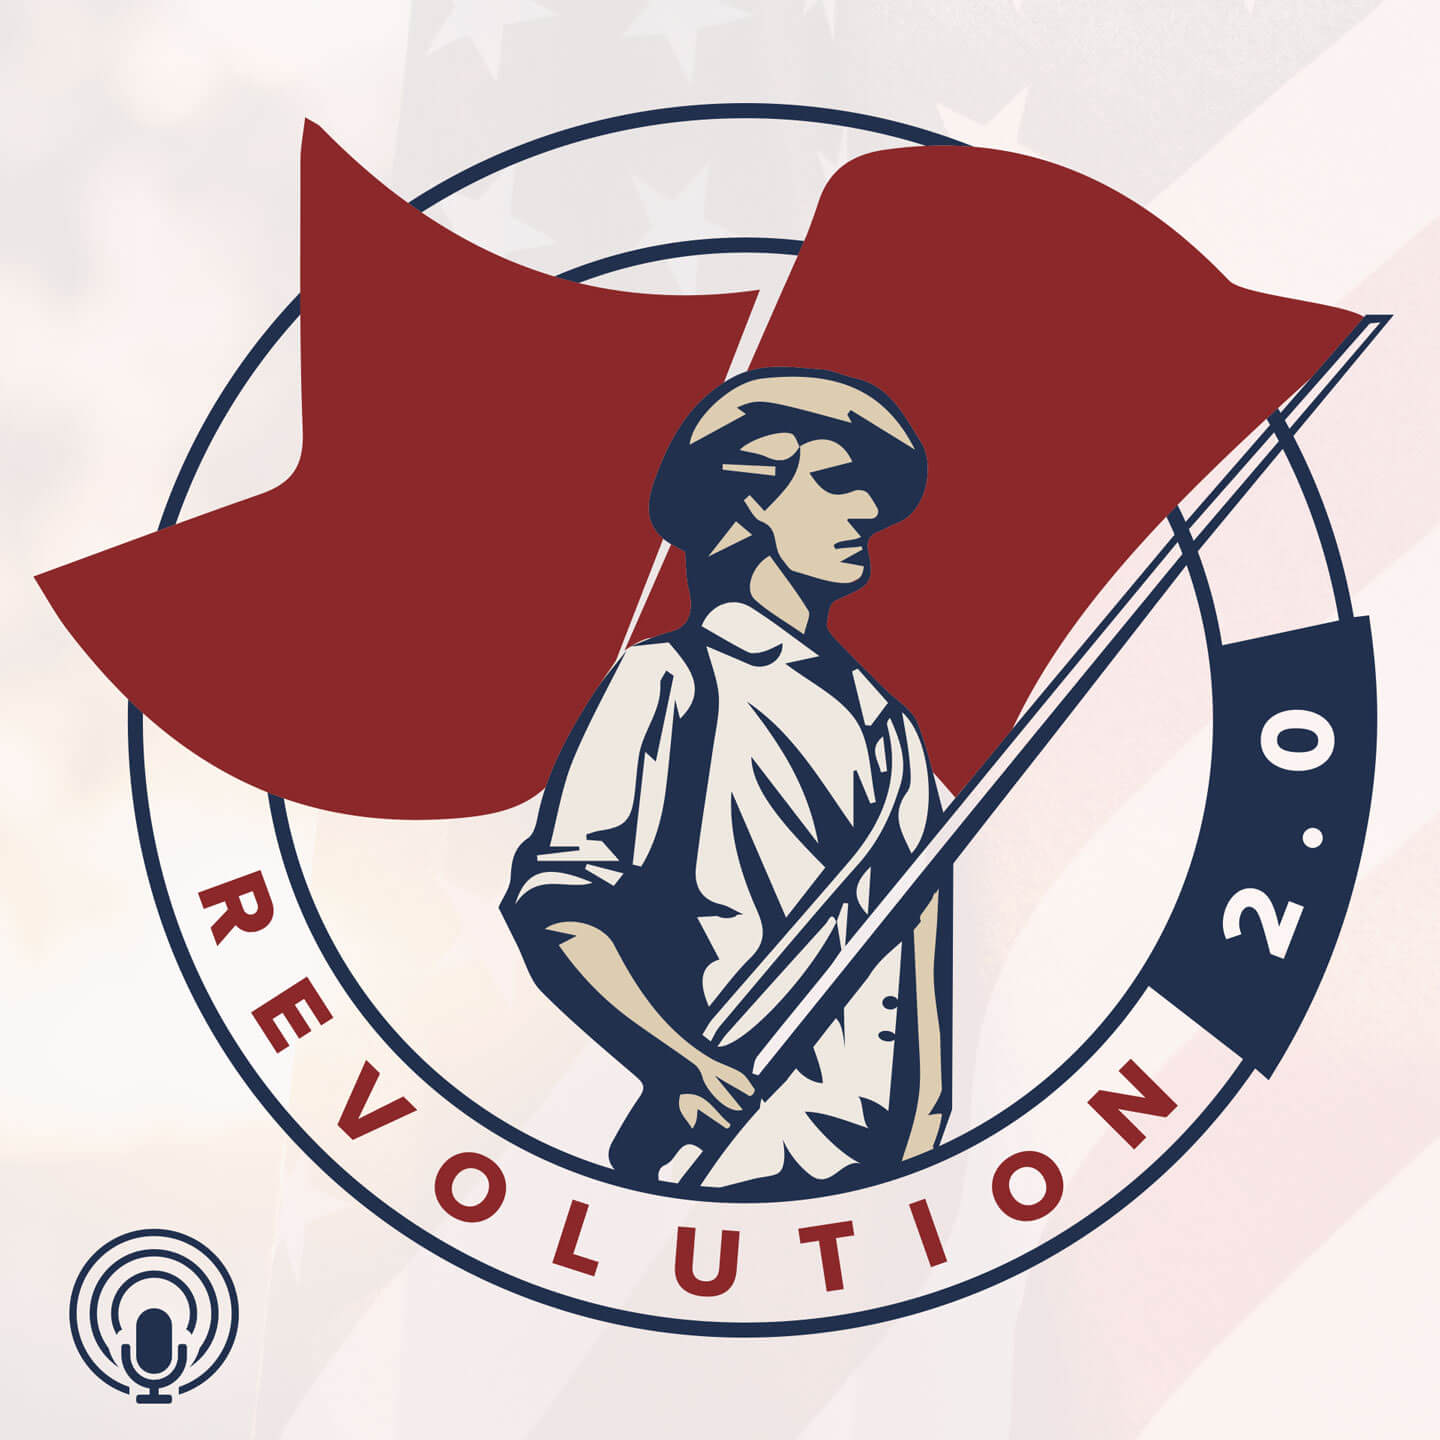 Rationalizations Over Common Goals: The Real Rioters (EP.296)